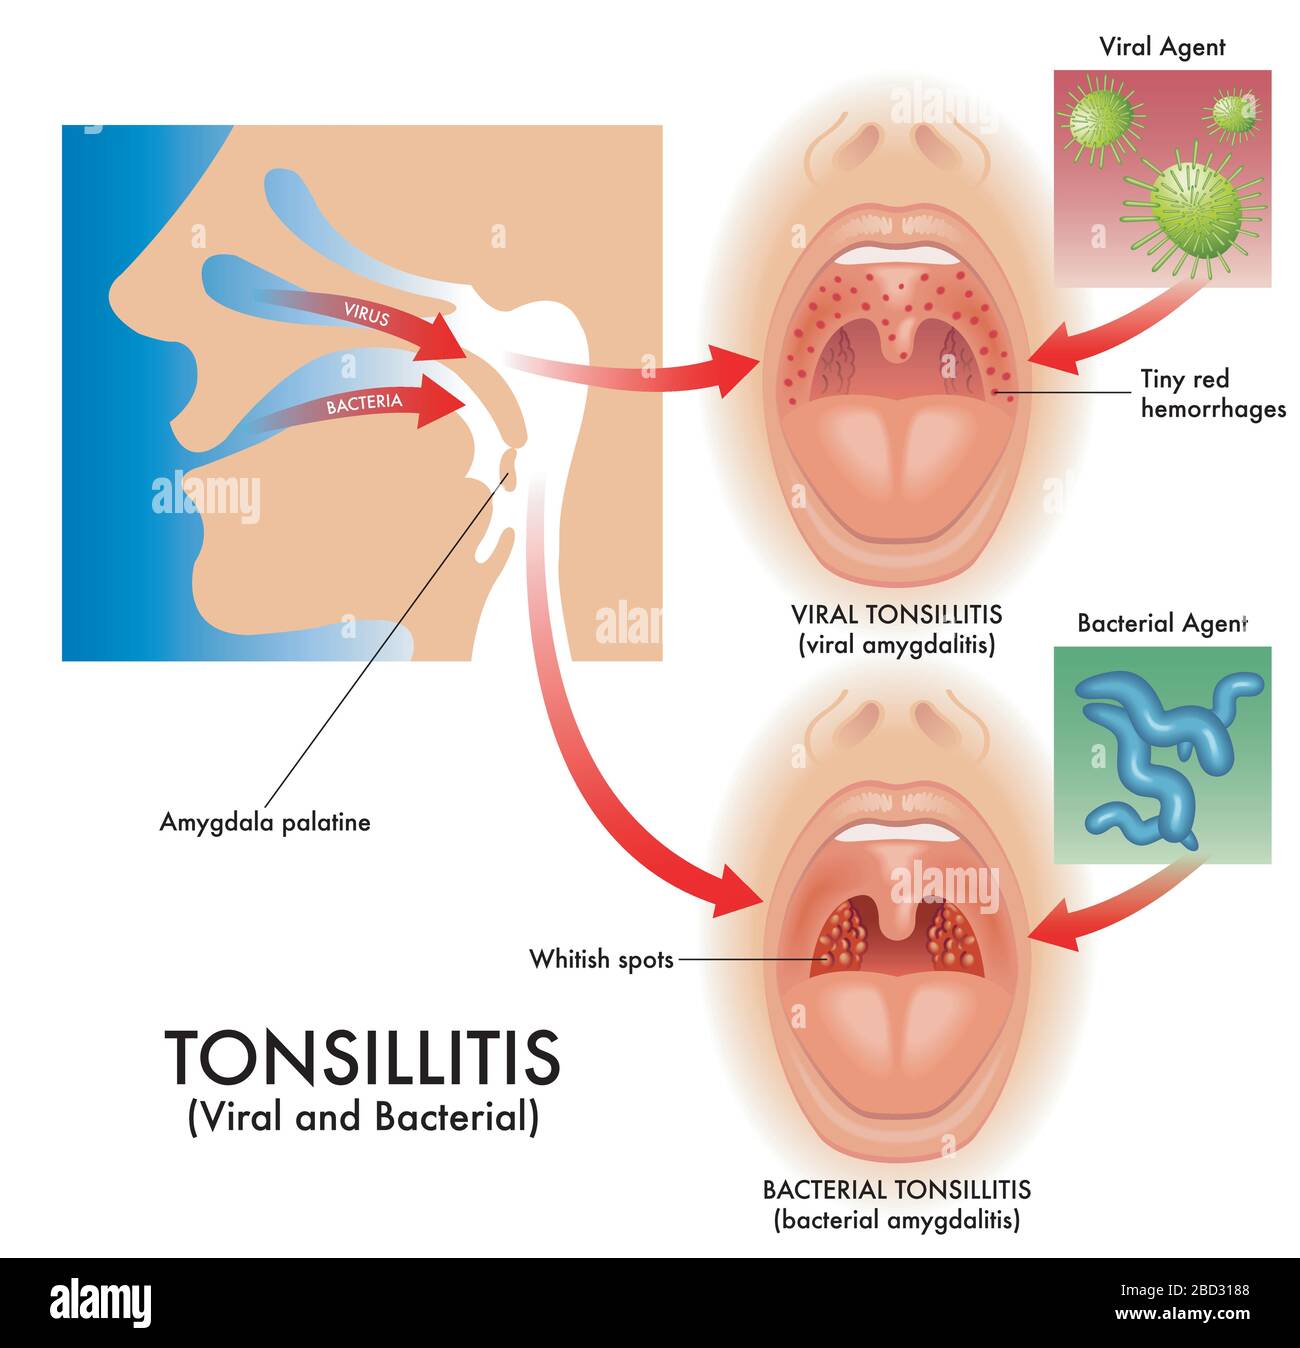 Medical illustration of the symptoms of viral and bacterial tonsillitis, also called viral amygdalitis and bacterial amygdalitis, with the pathogens t Stock Vector